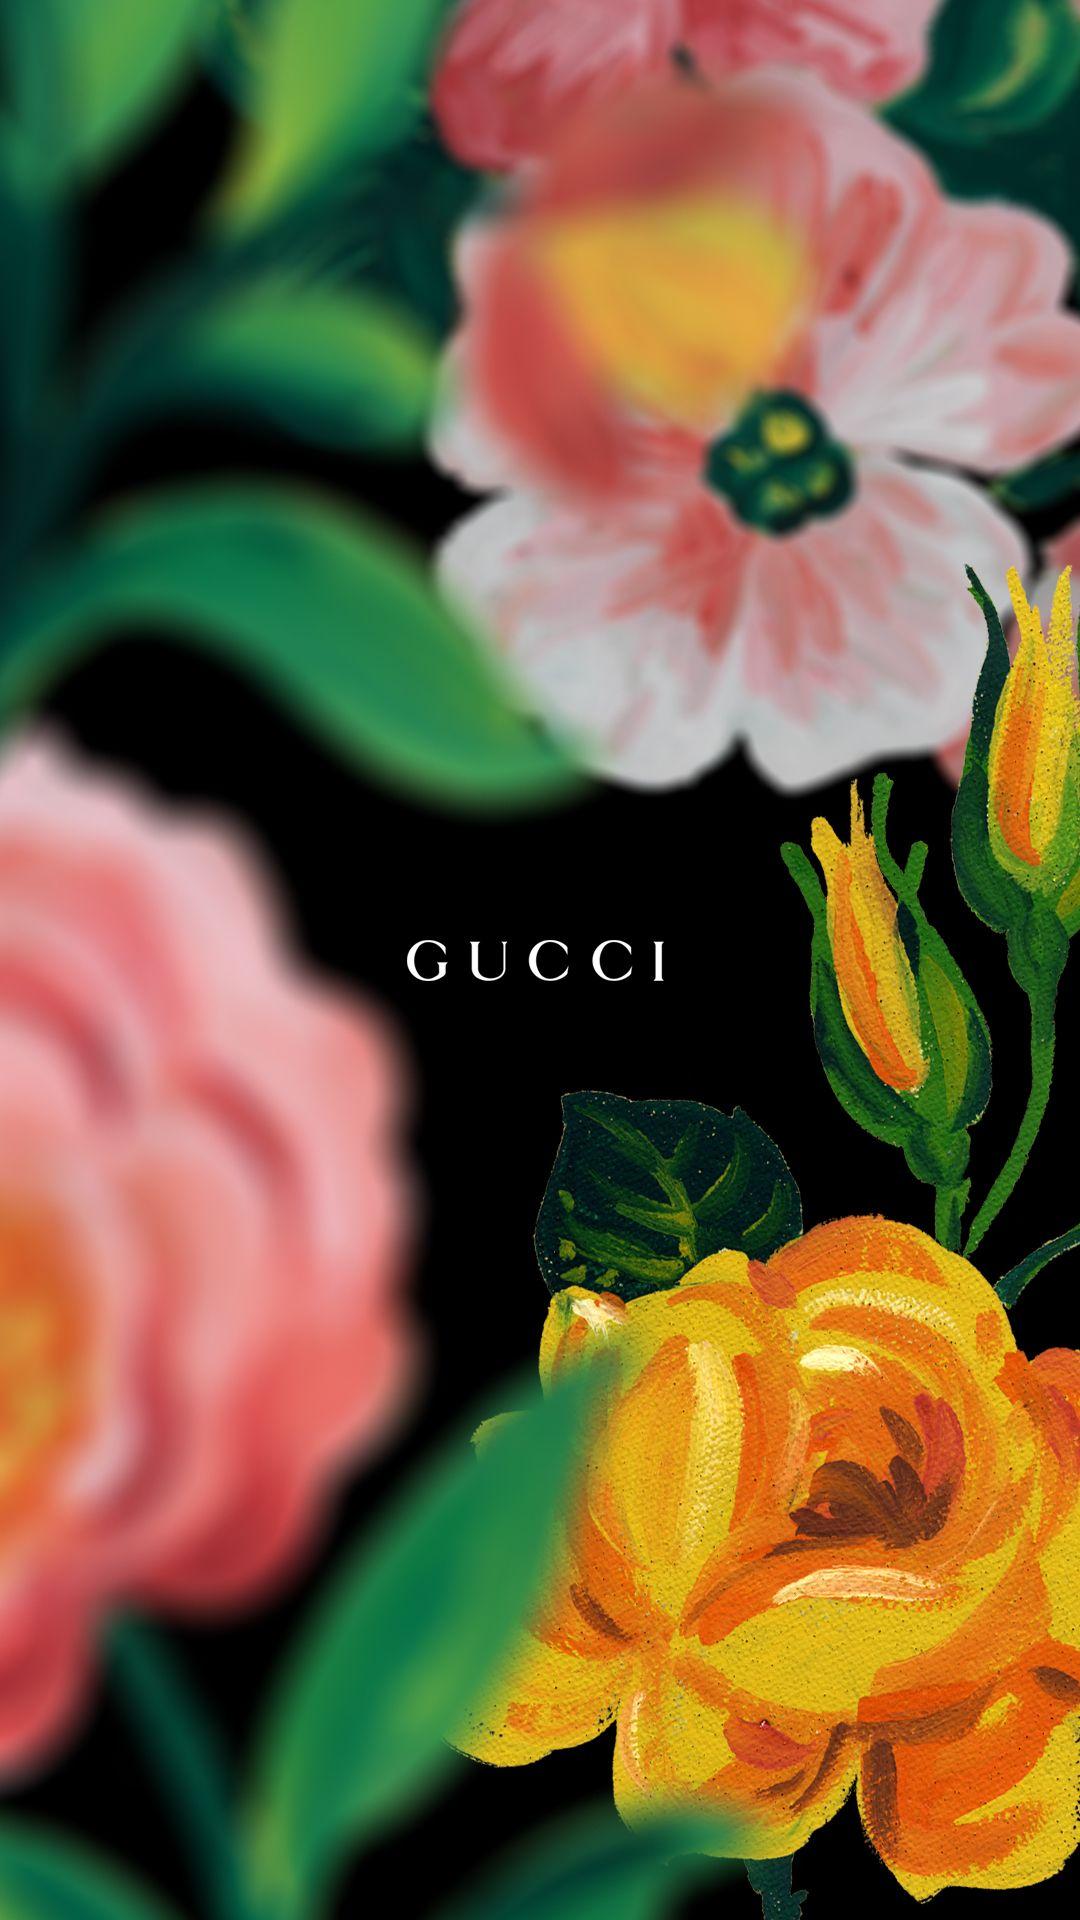 GUCCI Wallpaper for iPhone, Android, Desktop & Tablet